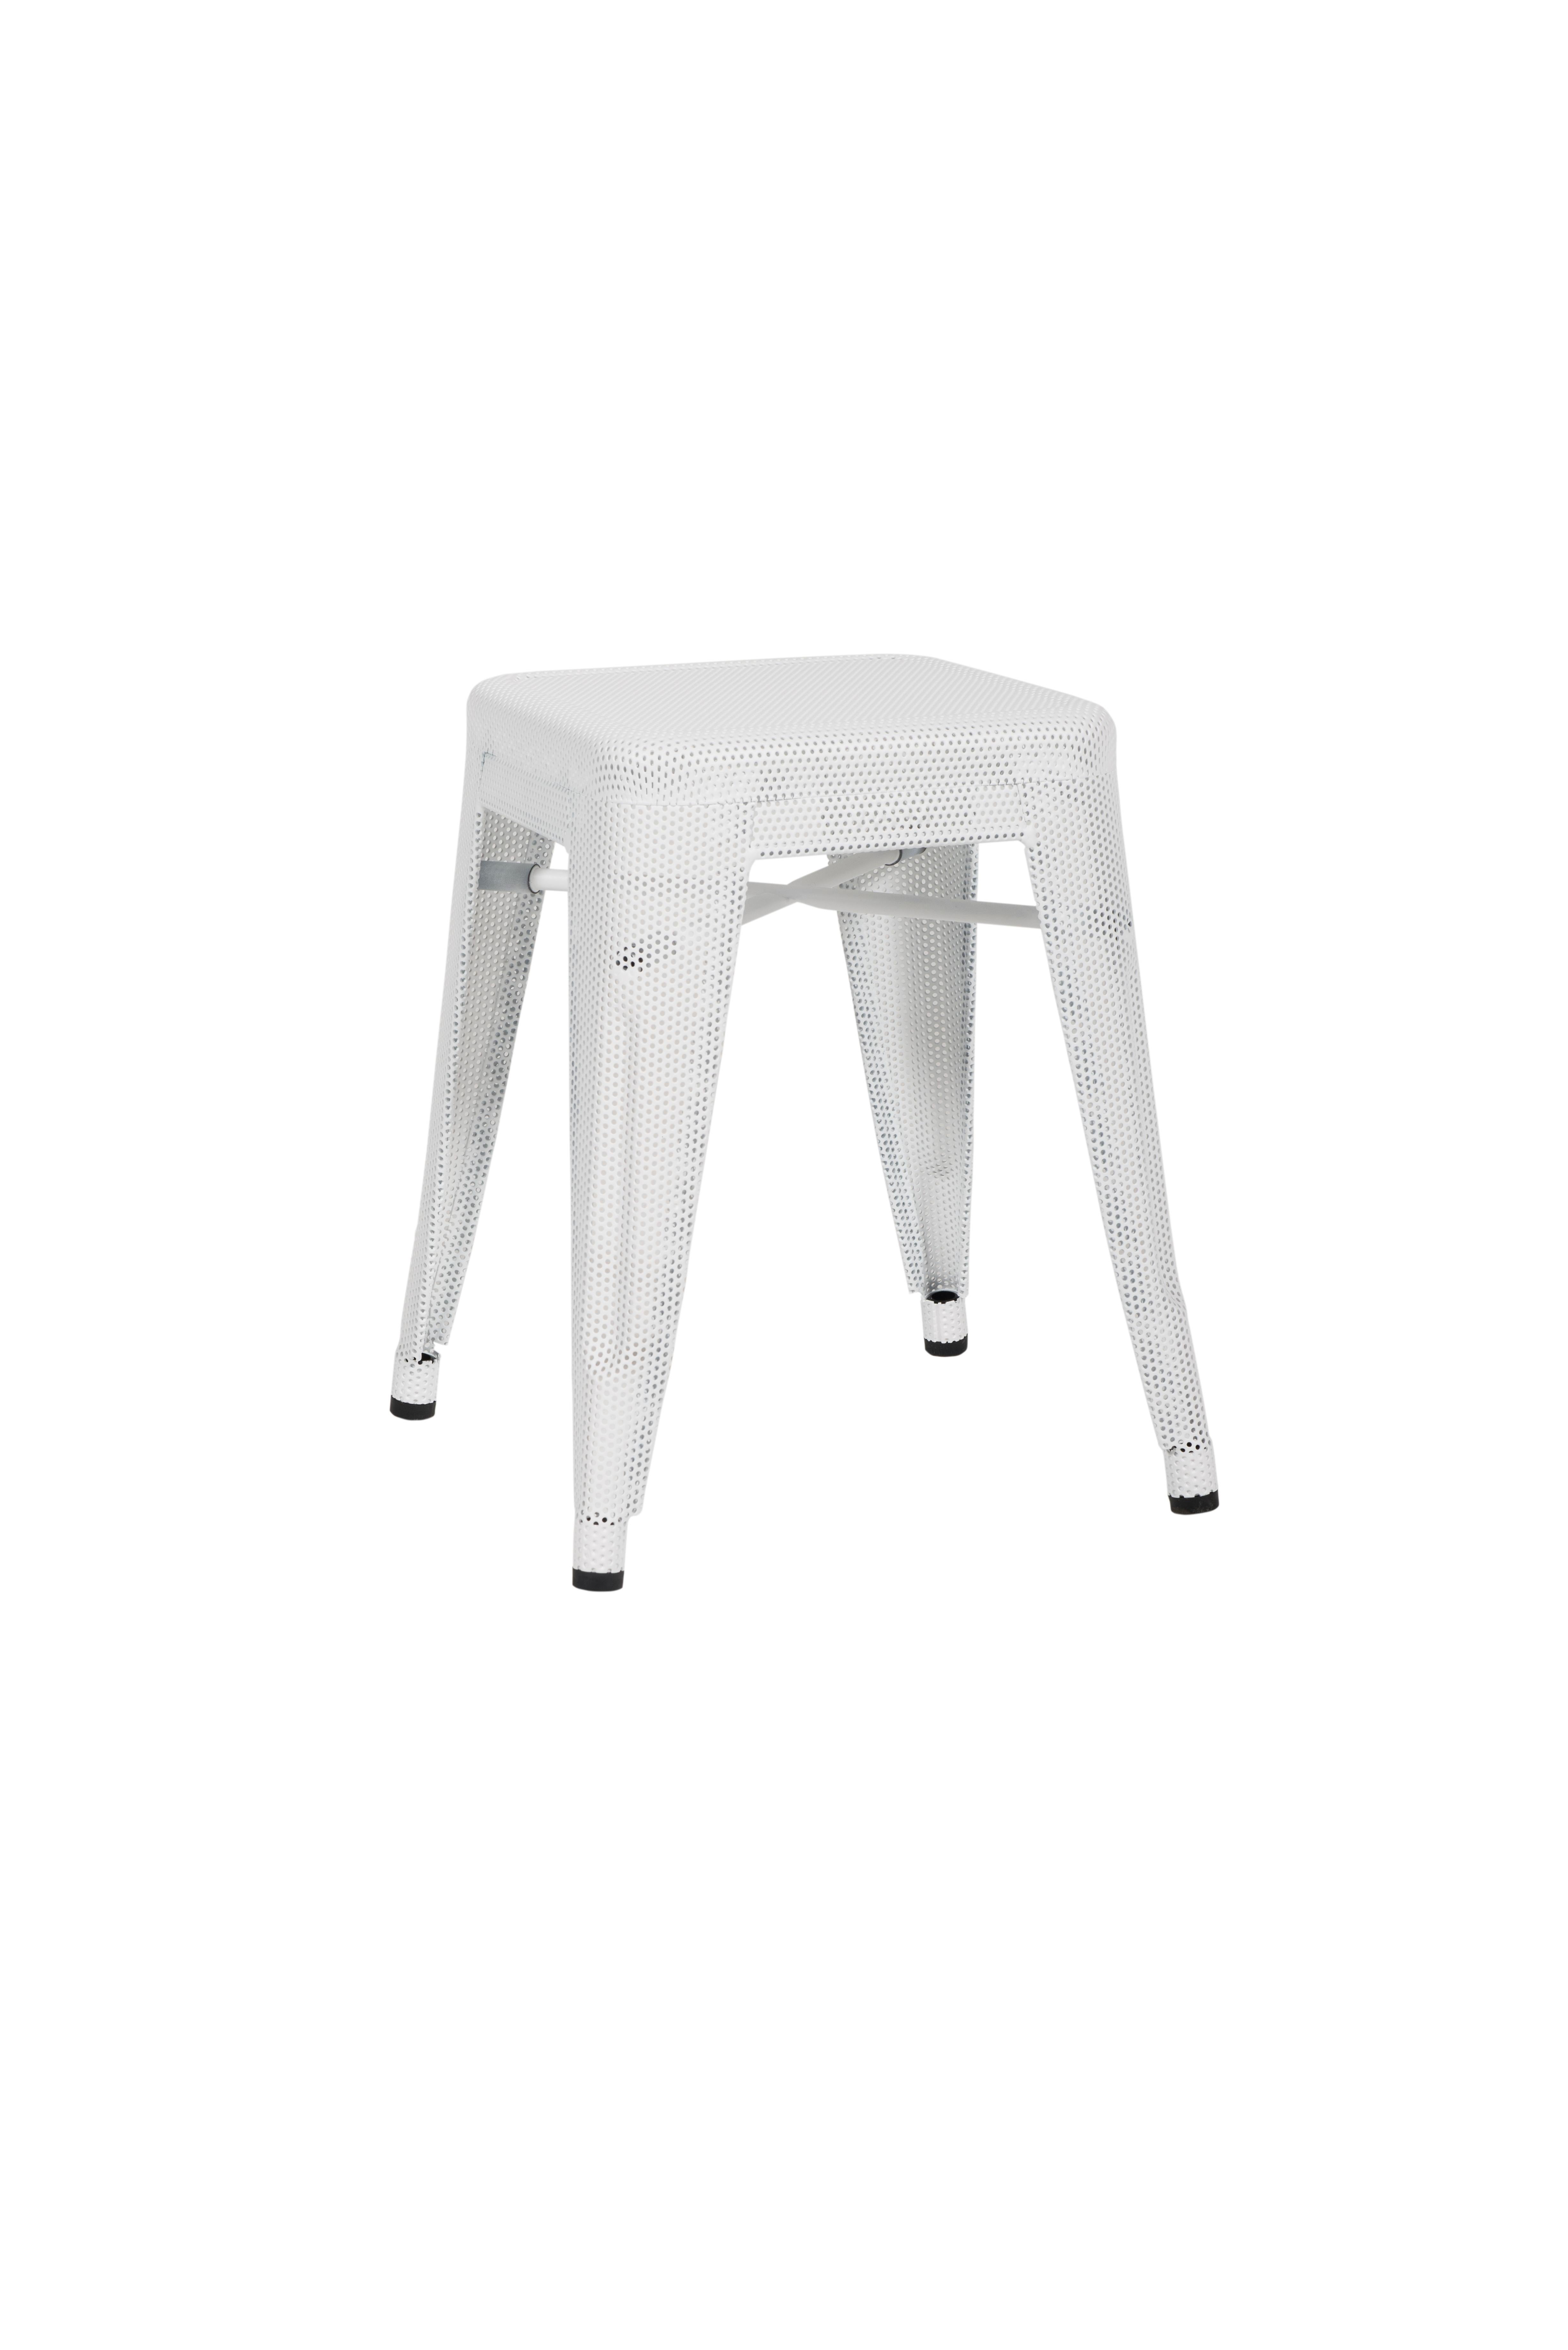 For Sale: White (Blanc) H Stool 45 Perforated in Essential Colors by Chantal Andriot and Tolix 2